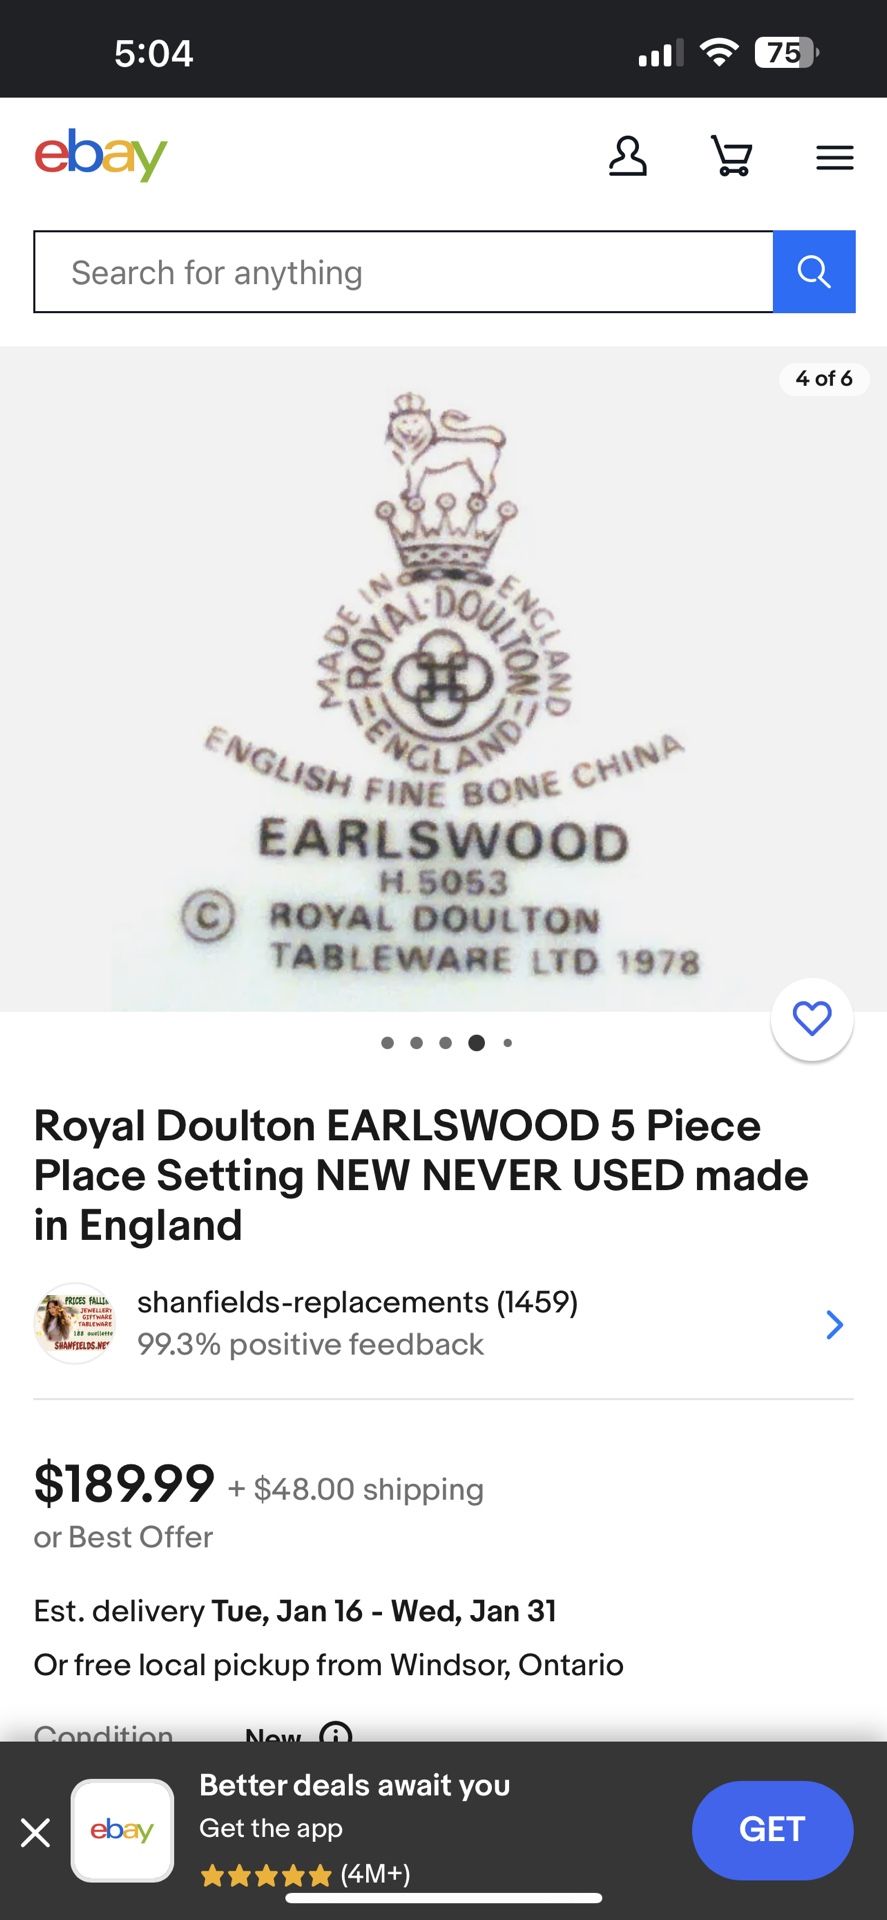 Royal Doulton EARLSWOOD 50 Piece made in England